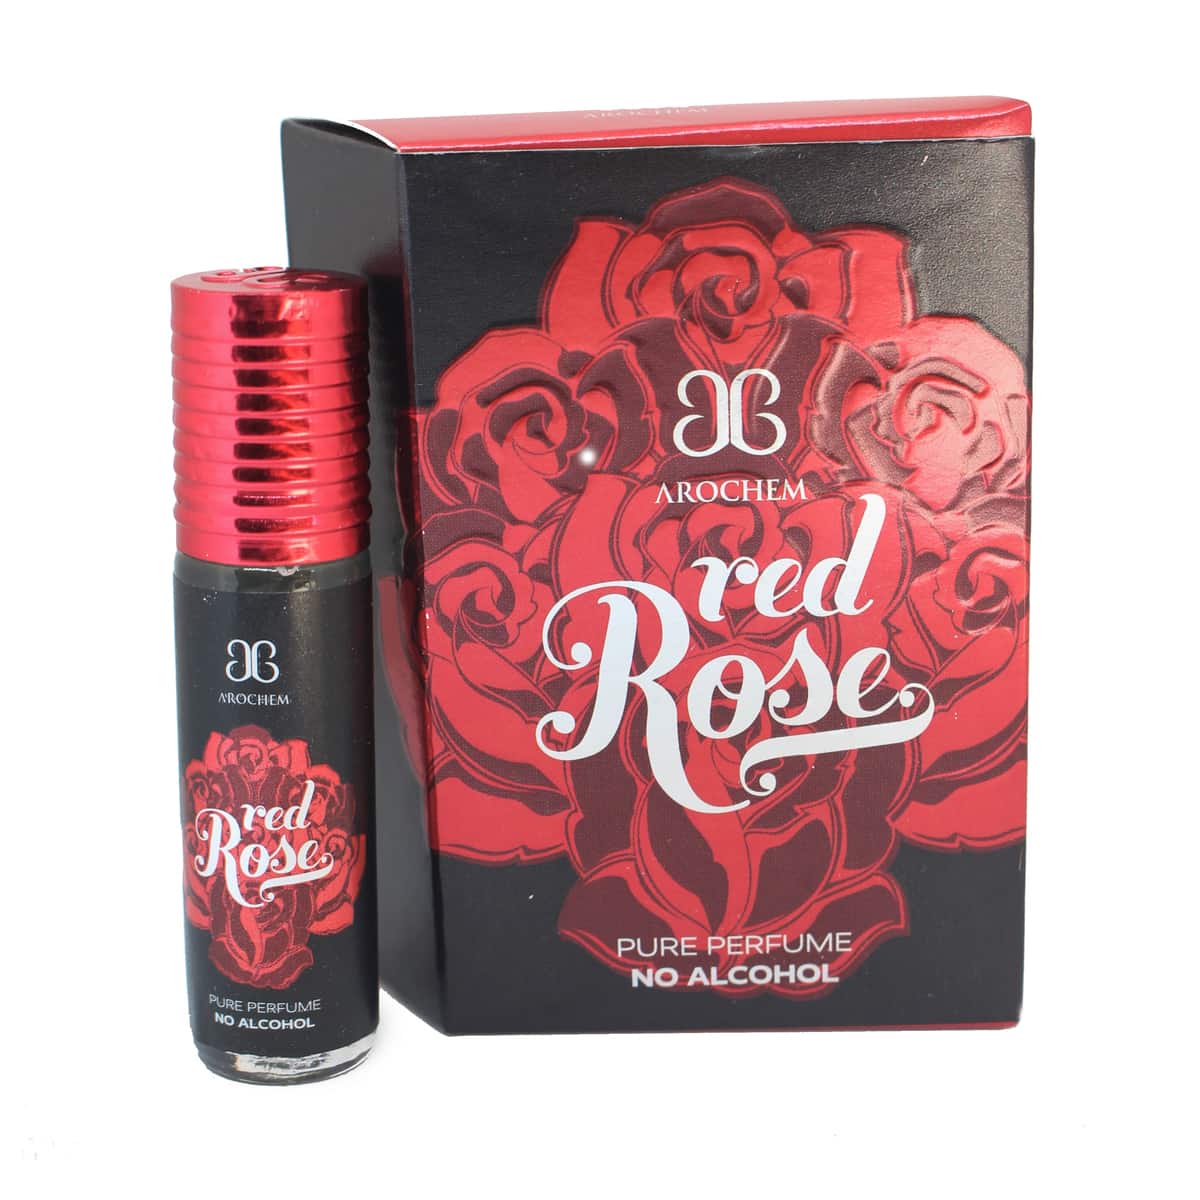 Arochem Red Rose Concentrated Apparel Pure Pefume 6 ml Roll On (Attar)